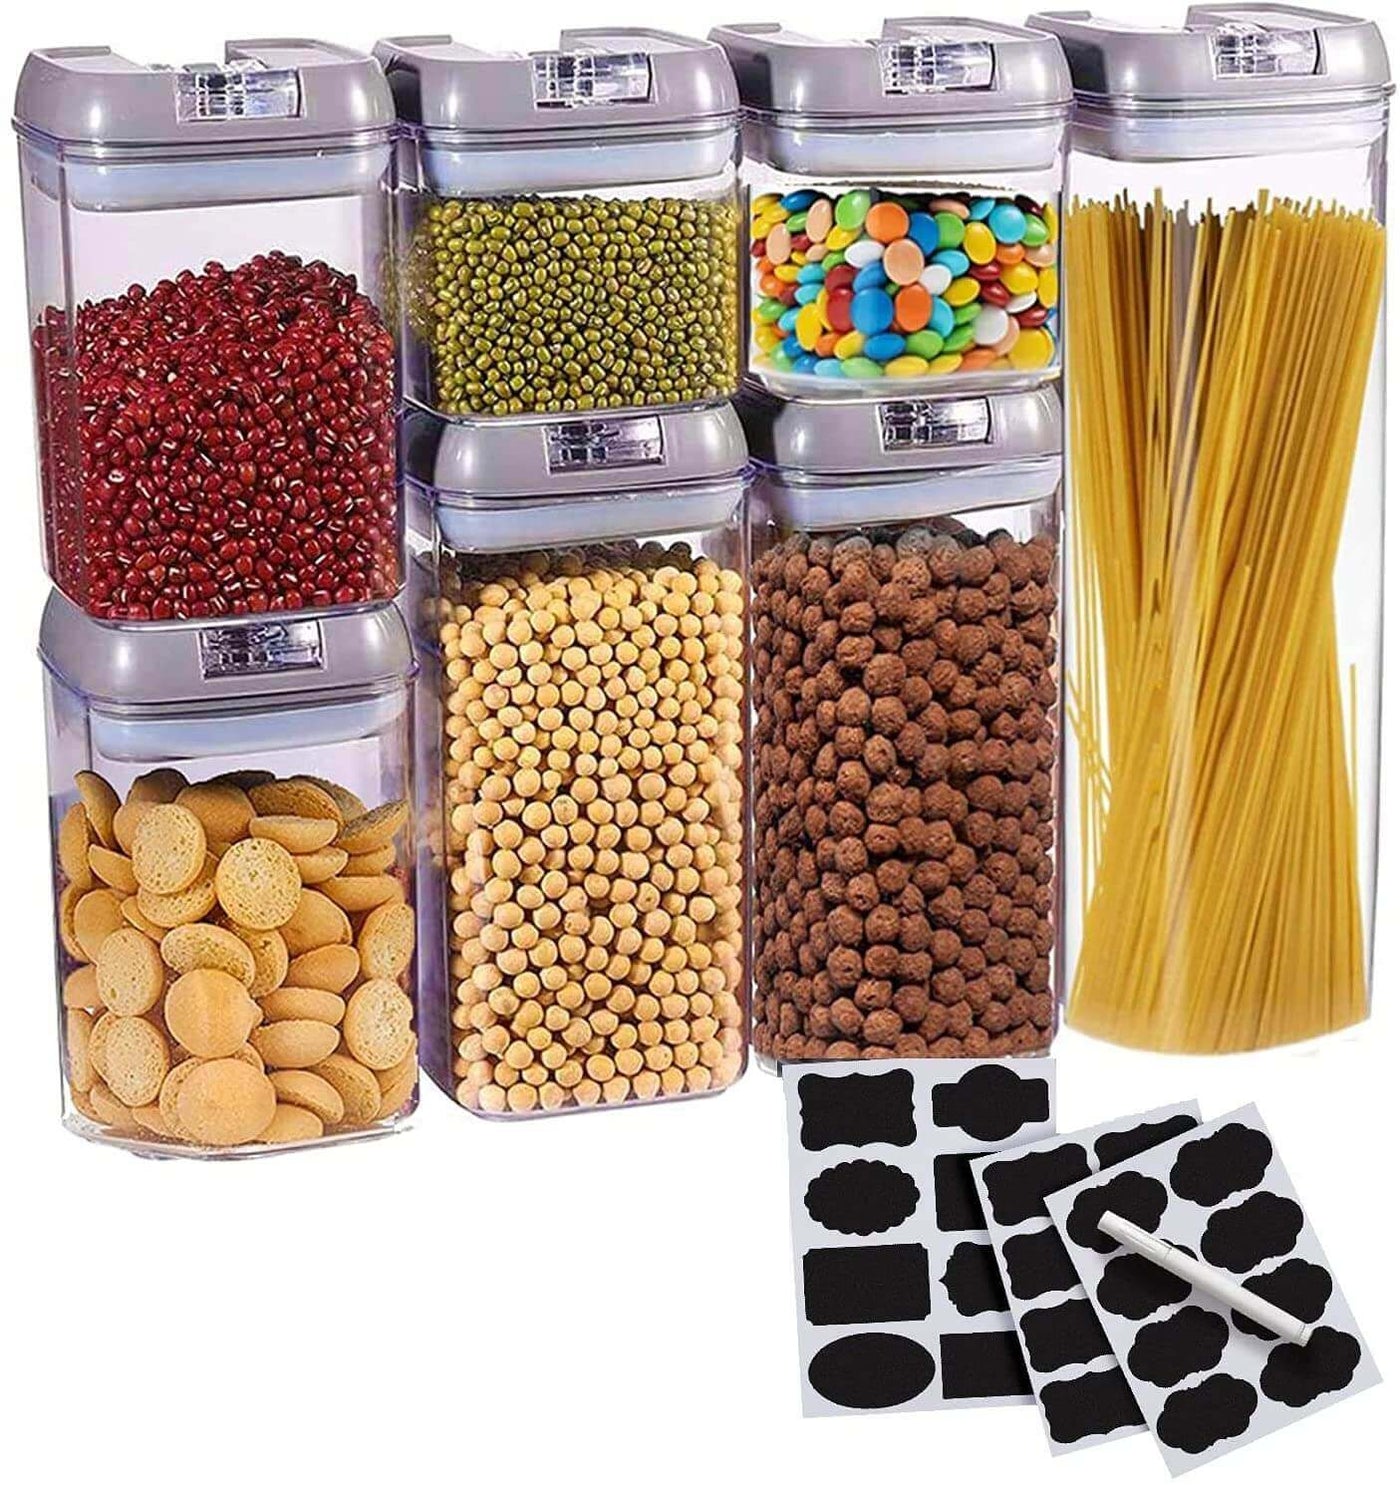 https://www.cheercollection.com/cdn/shop/products/cheer-collection-set-of-7-airtight-food-storage-containers-heavy-duty-pantry-organizer-bins-bpa-free-plastic-containers-plus-dry-erase-marker-and-labels-gray-900926_1400x.jpg?v=1672396883